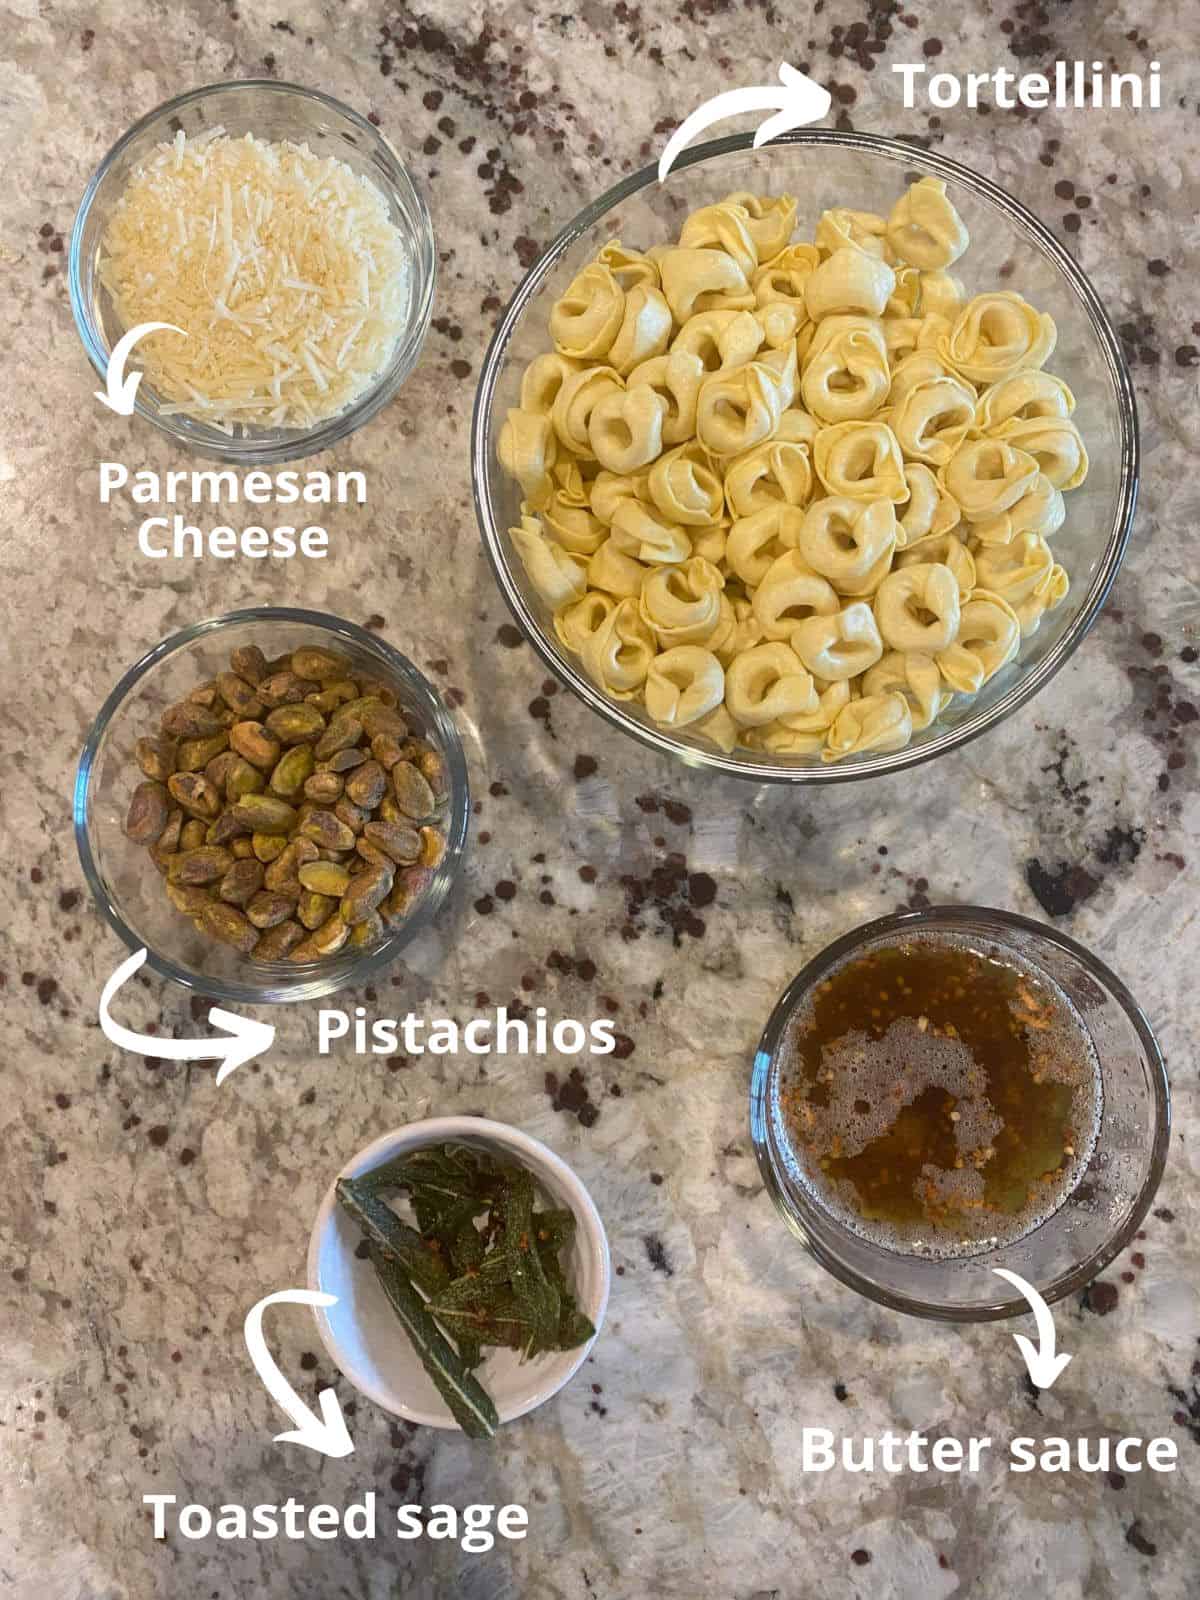 ingredients for the butter sauce tortellini on a counter: cheese tortellini, parmesan cheese, pistachios, toasted sage leaves, and butter sauce.